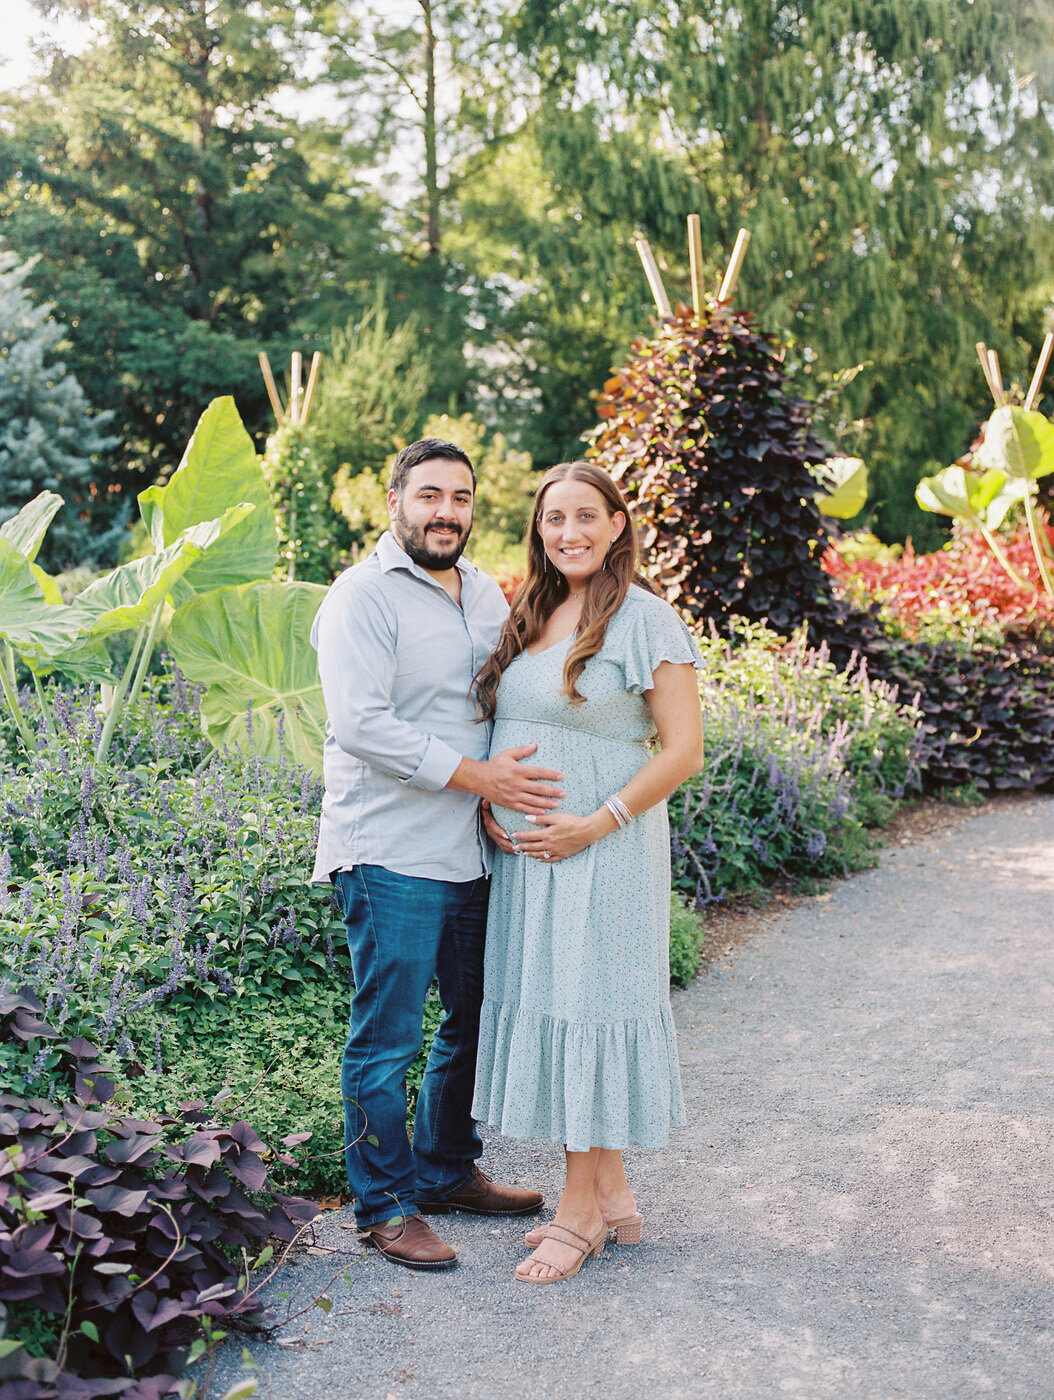 Raleigh Maternity Photographer | Jessica Agee Photography - 006